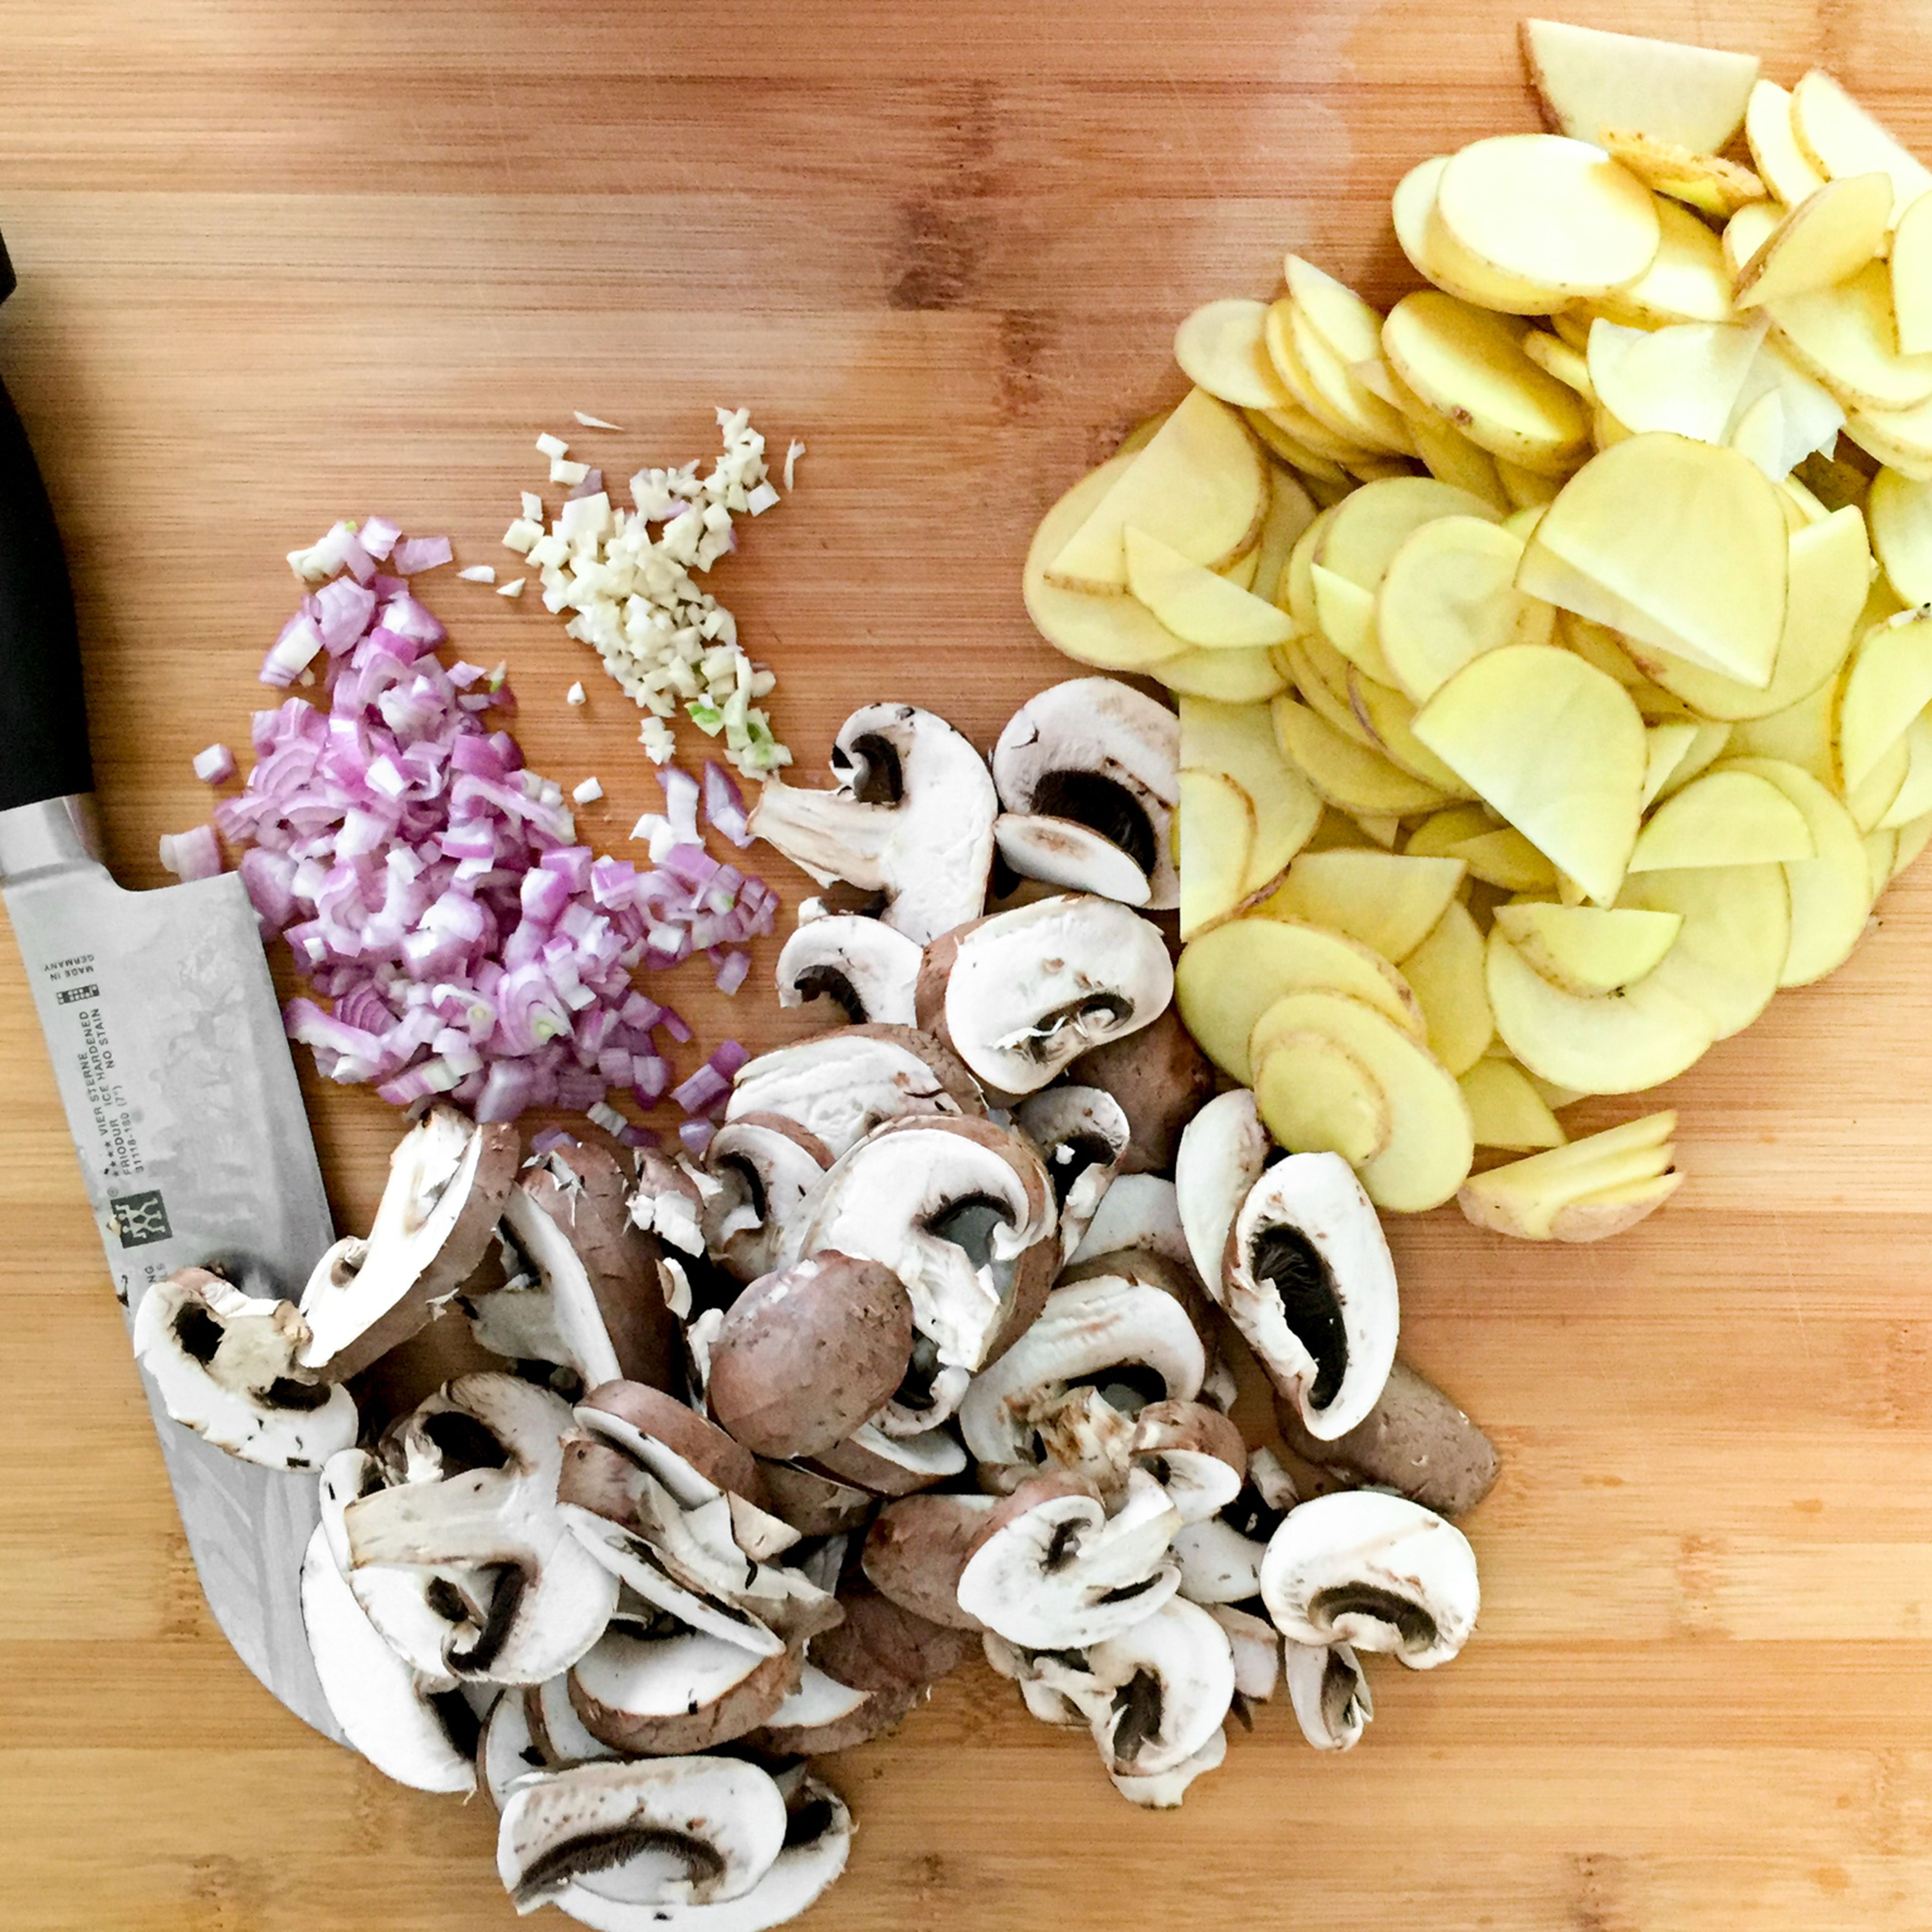 Preheat the oven to 200°C/390°F. Peel and slice potatoes. Finely chop onion and garlic. Cut mushrooms into thick slices.